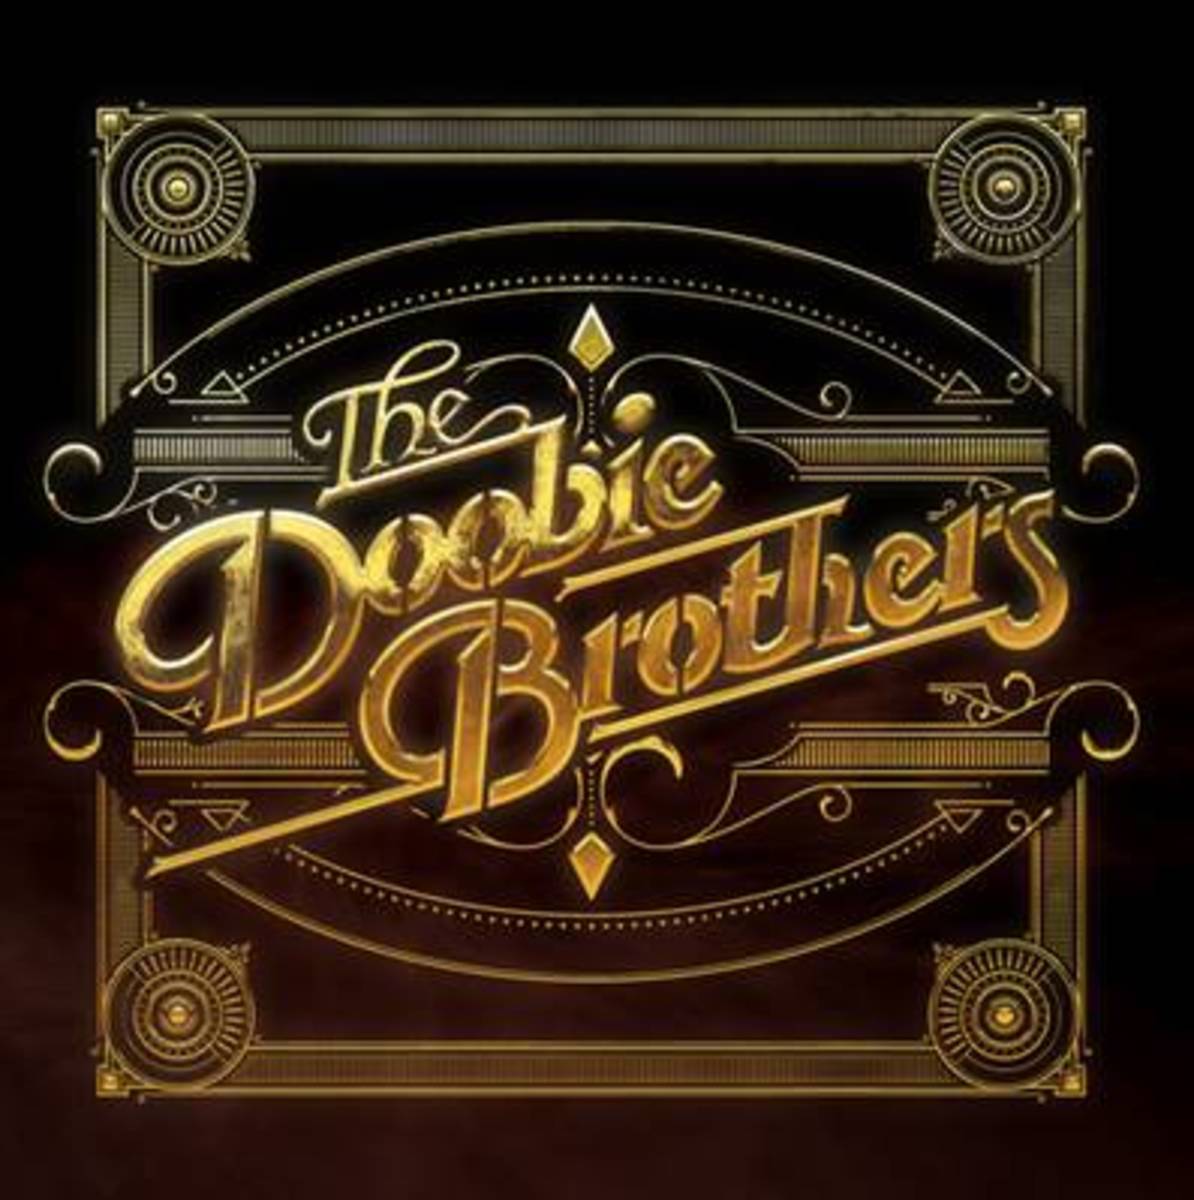 Art for Takin' It to the Streets by The Doobie Brothers